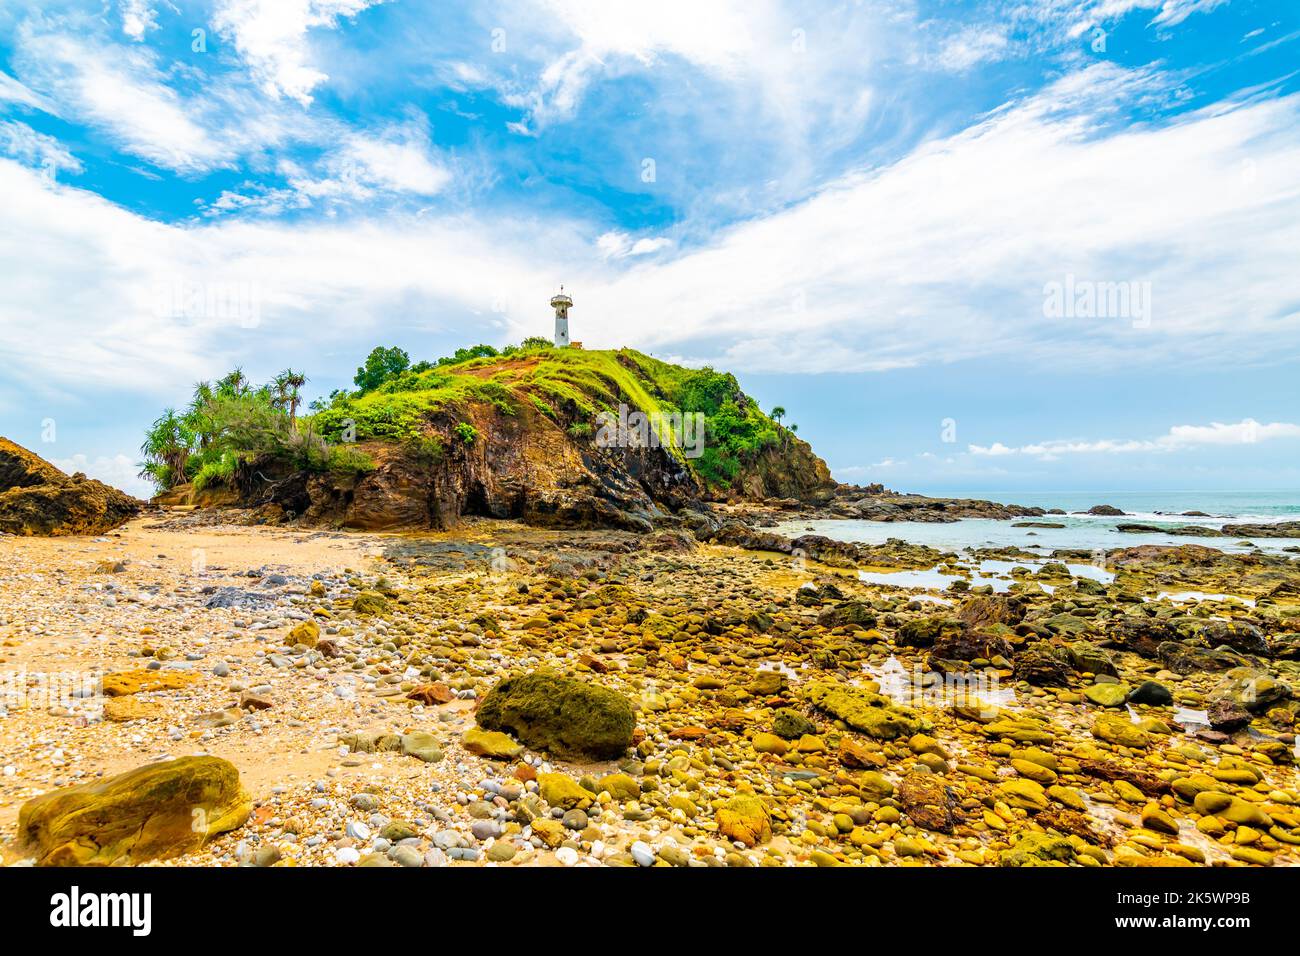 Lighthouse on the rock at Mu Ko Lanta national park, Thailand. View from  the beach with stones. Summer weather, blue sky with clouds Stock Photo -  Alamy